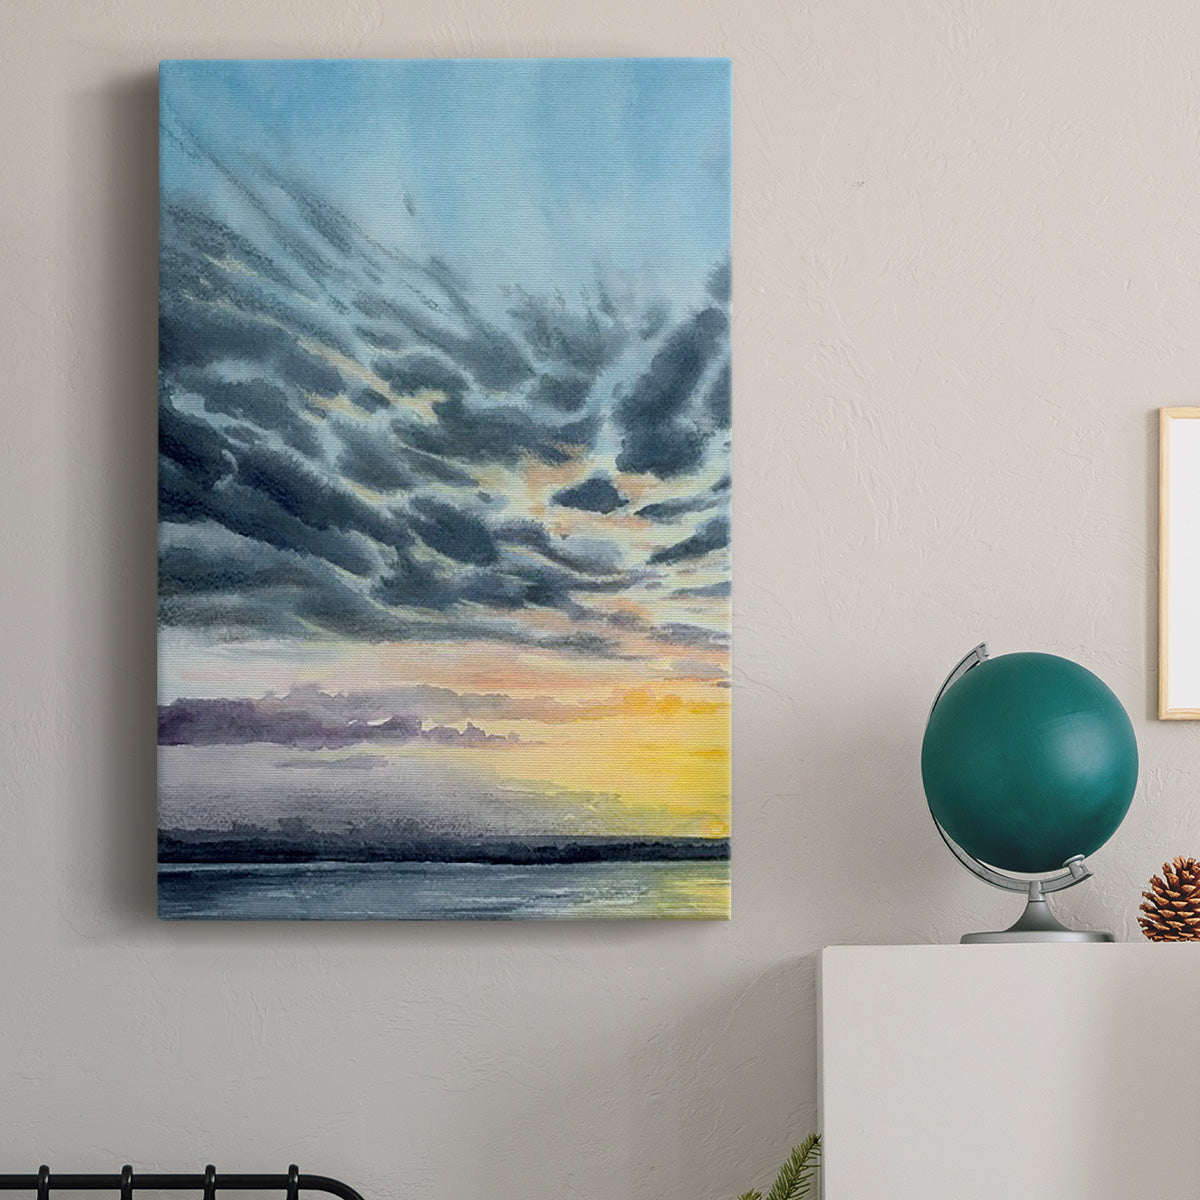 Anastasia Island Sunset I Premium Gallery Wrapped Canvas - Ready to Hang